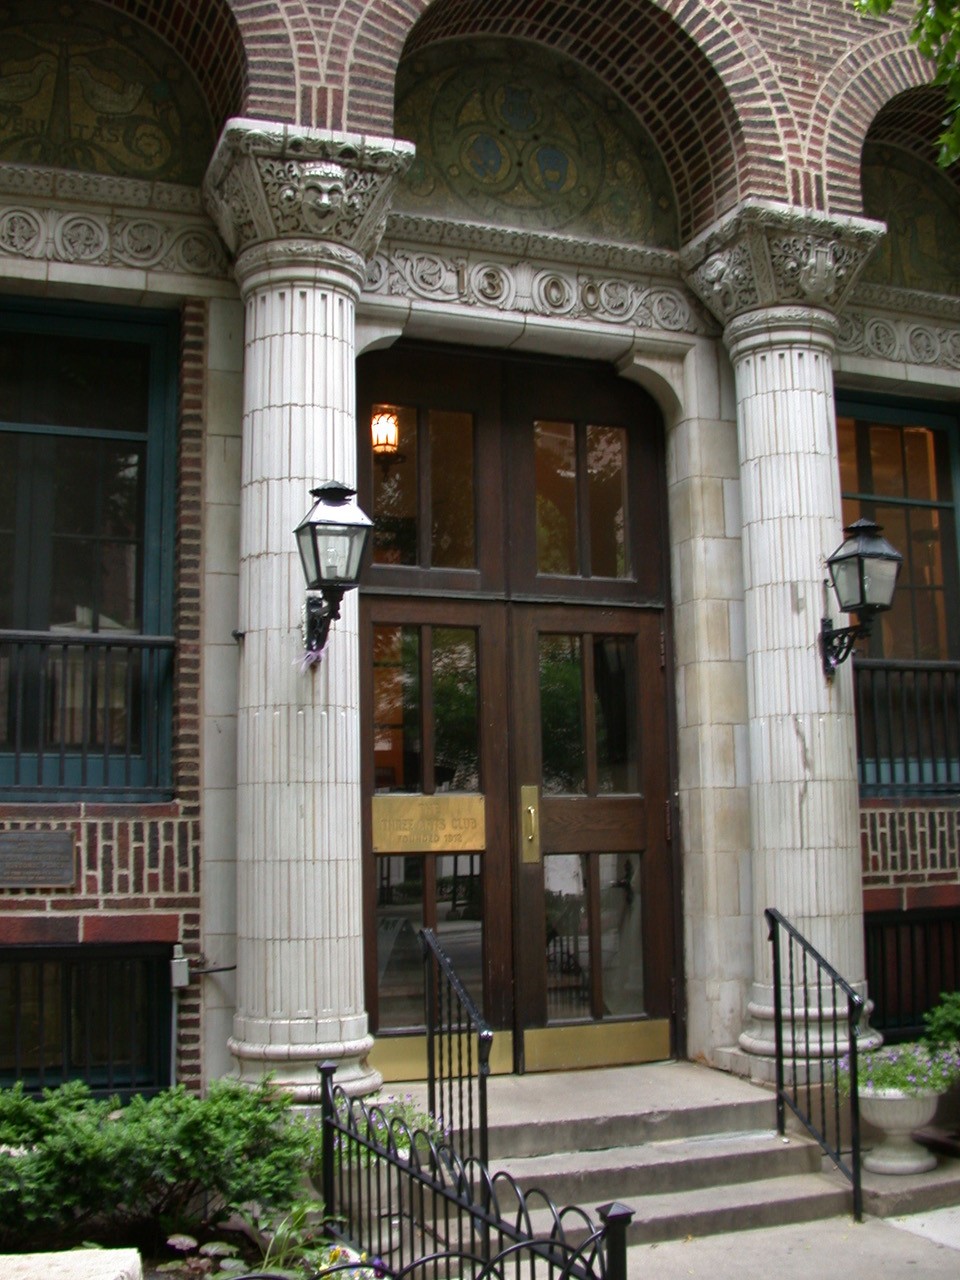 Image of wooden double doors flanked by decorative columns serving as the entrance to the Three Arts Club building